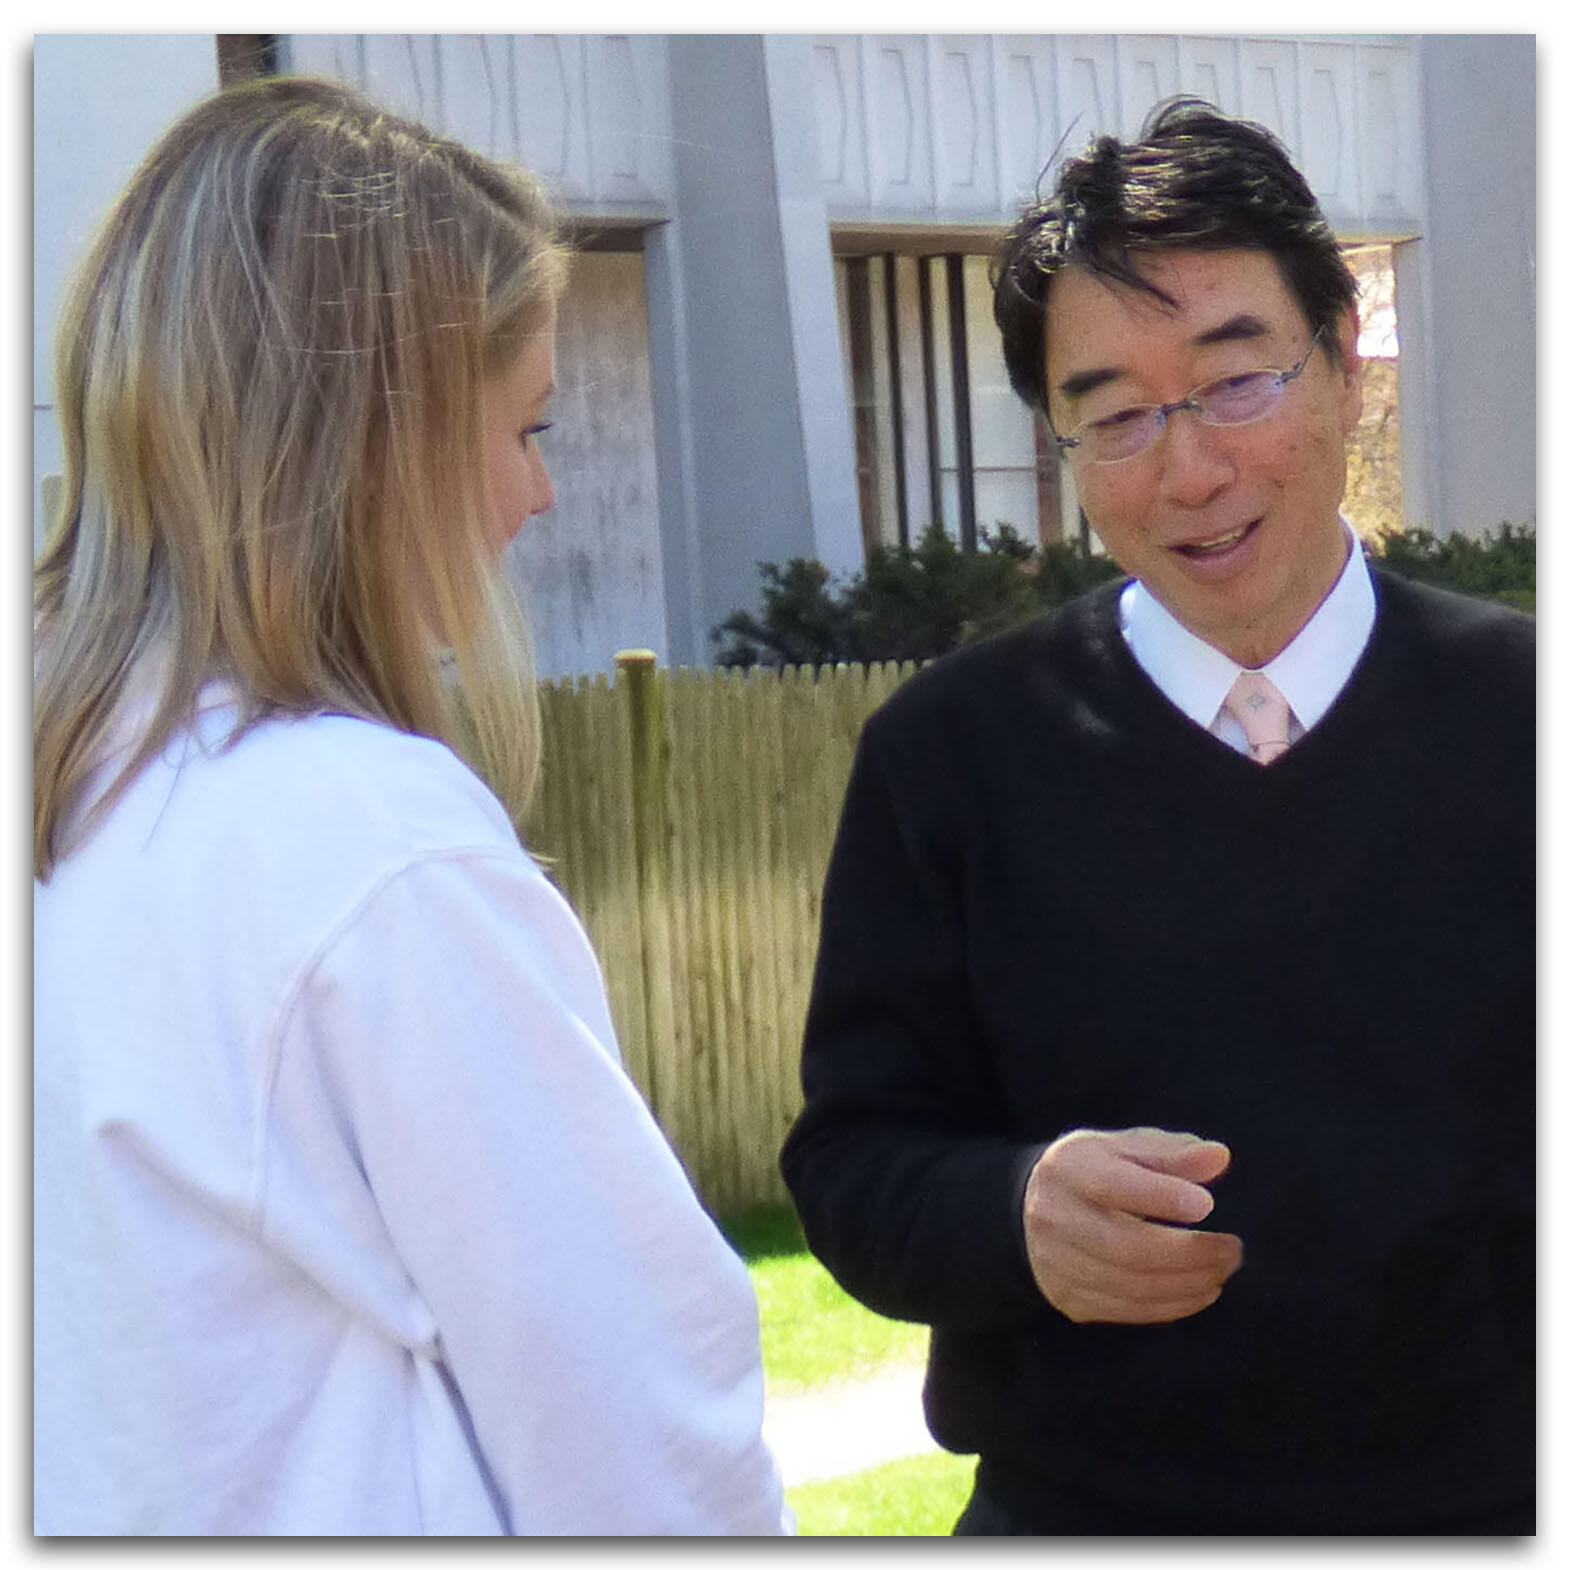 Professor Ryuichi Abe, right, speaks to blond student seen from behind, left